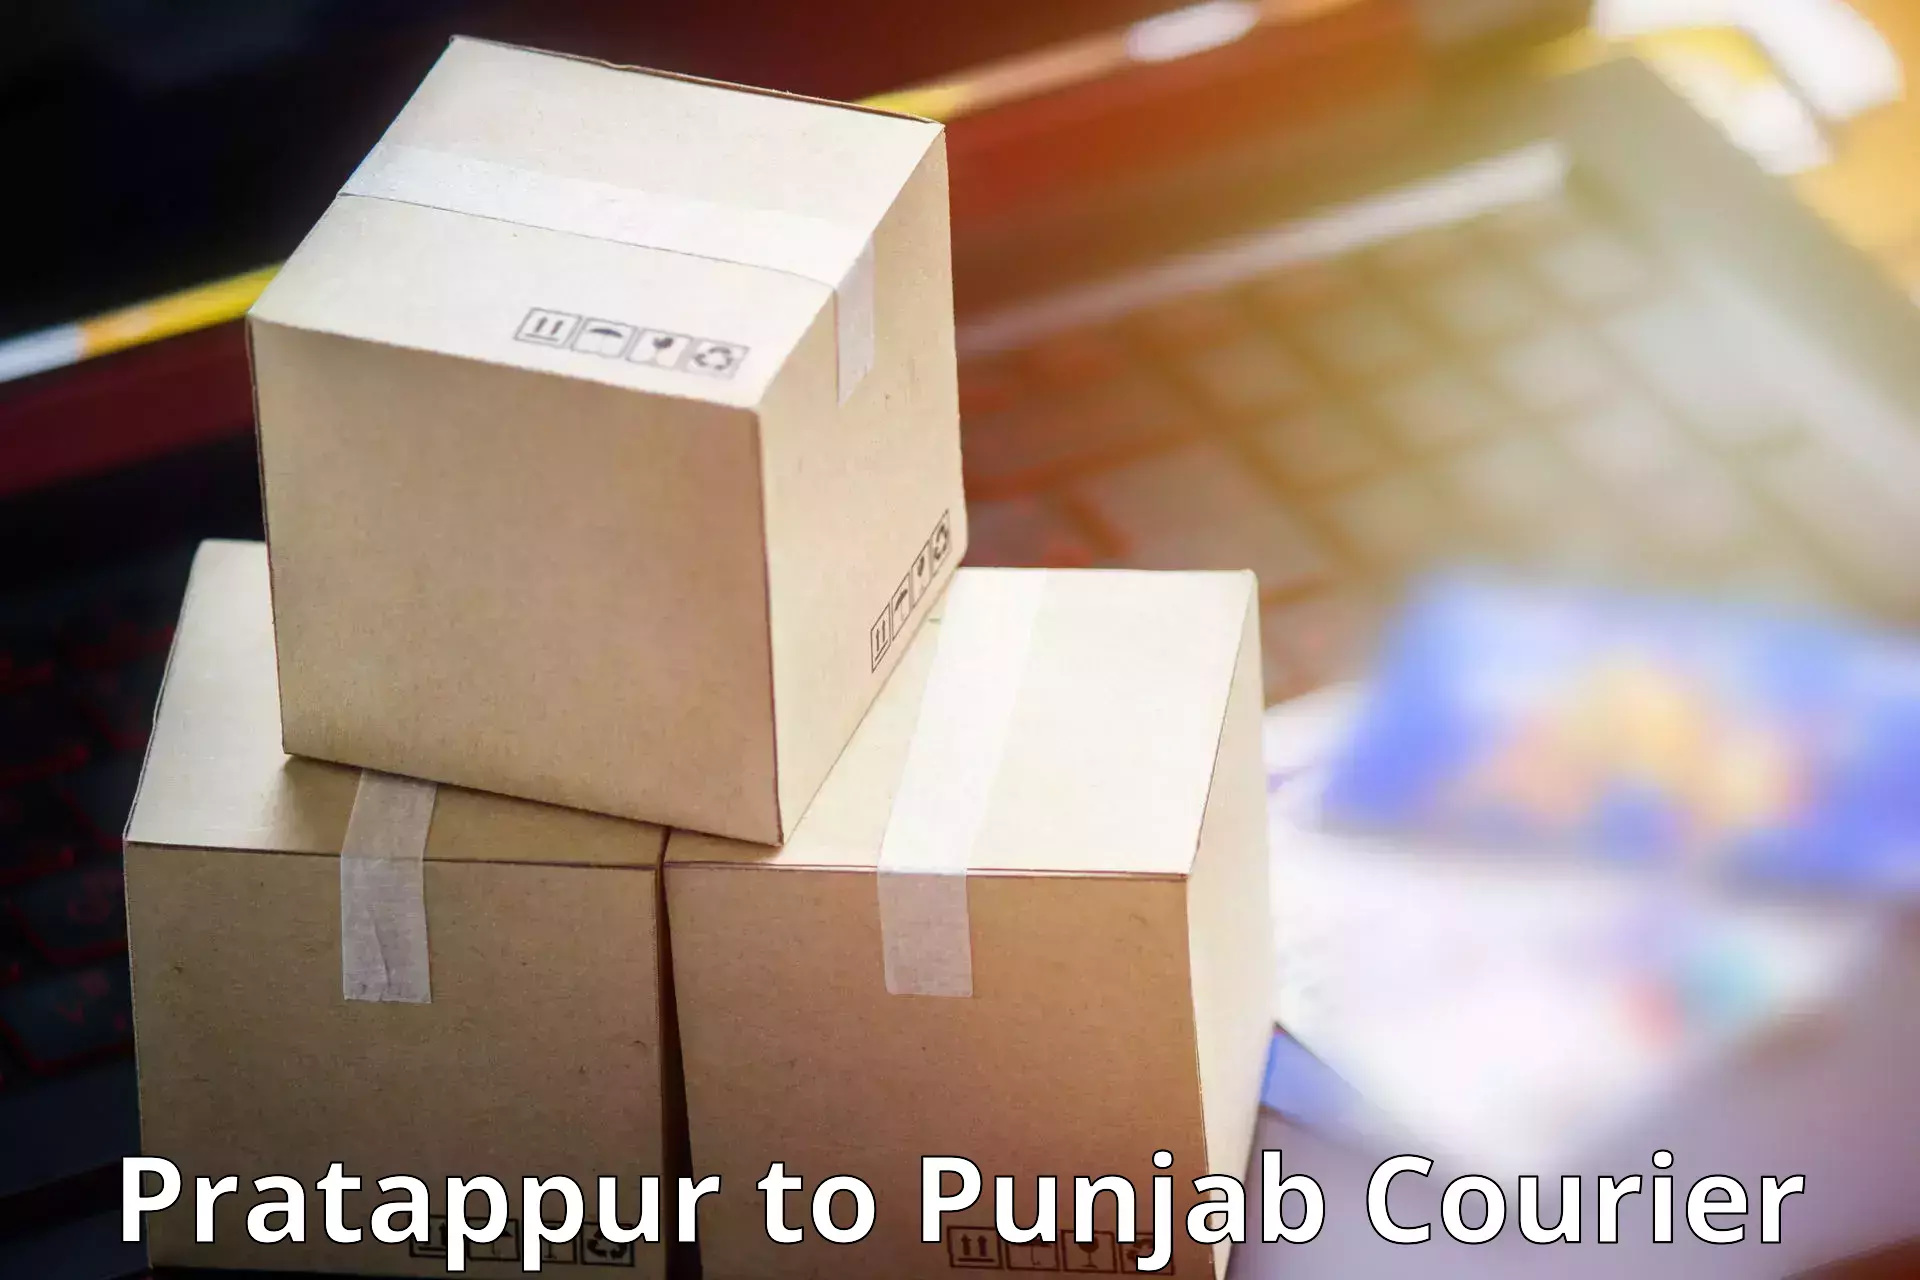 Corporate courier solutions Pratappur to Central University of Punjab Bathinda